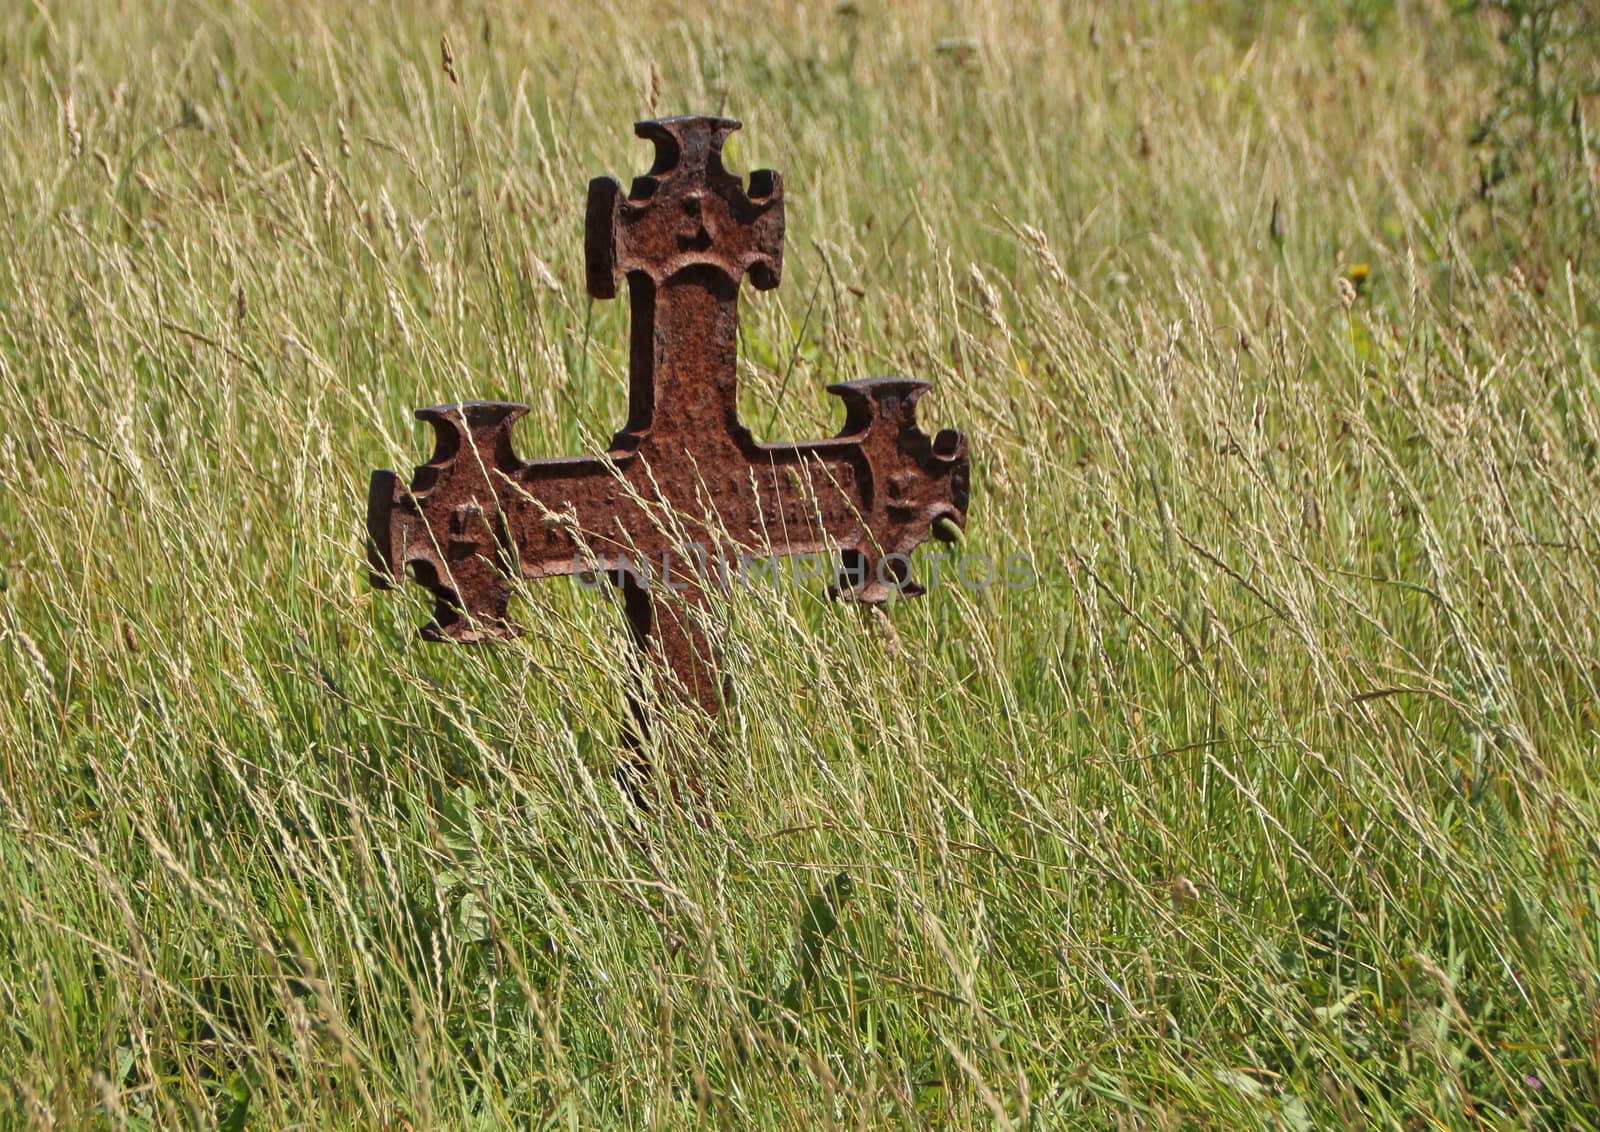 Isolated Rusty Iron Cross at Ancient Graveyard by HoleInTheBox